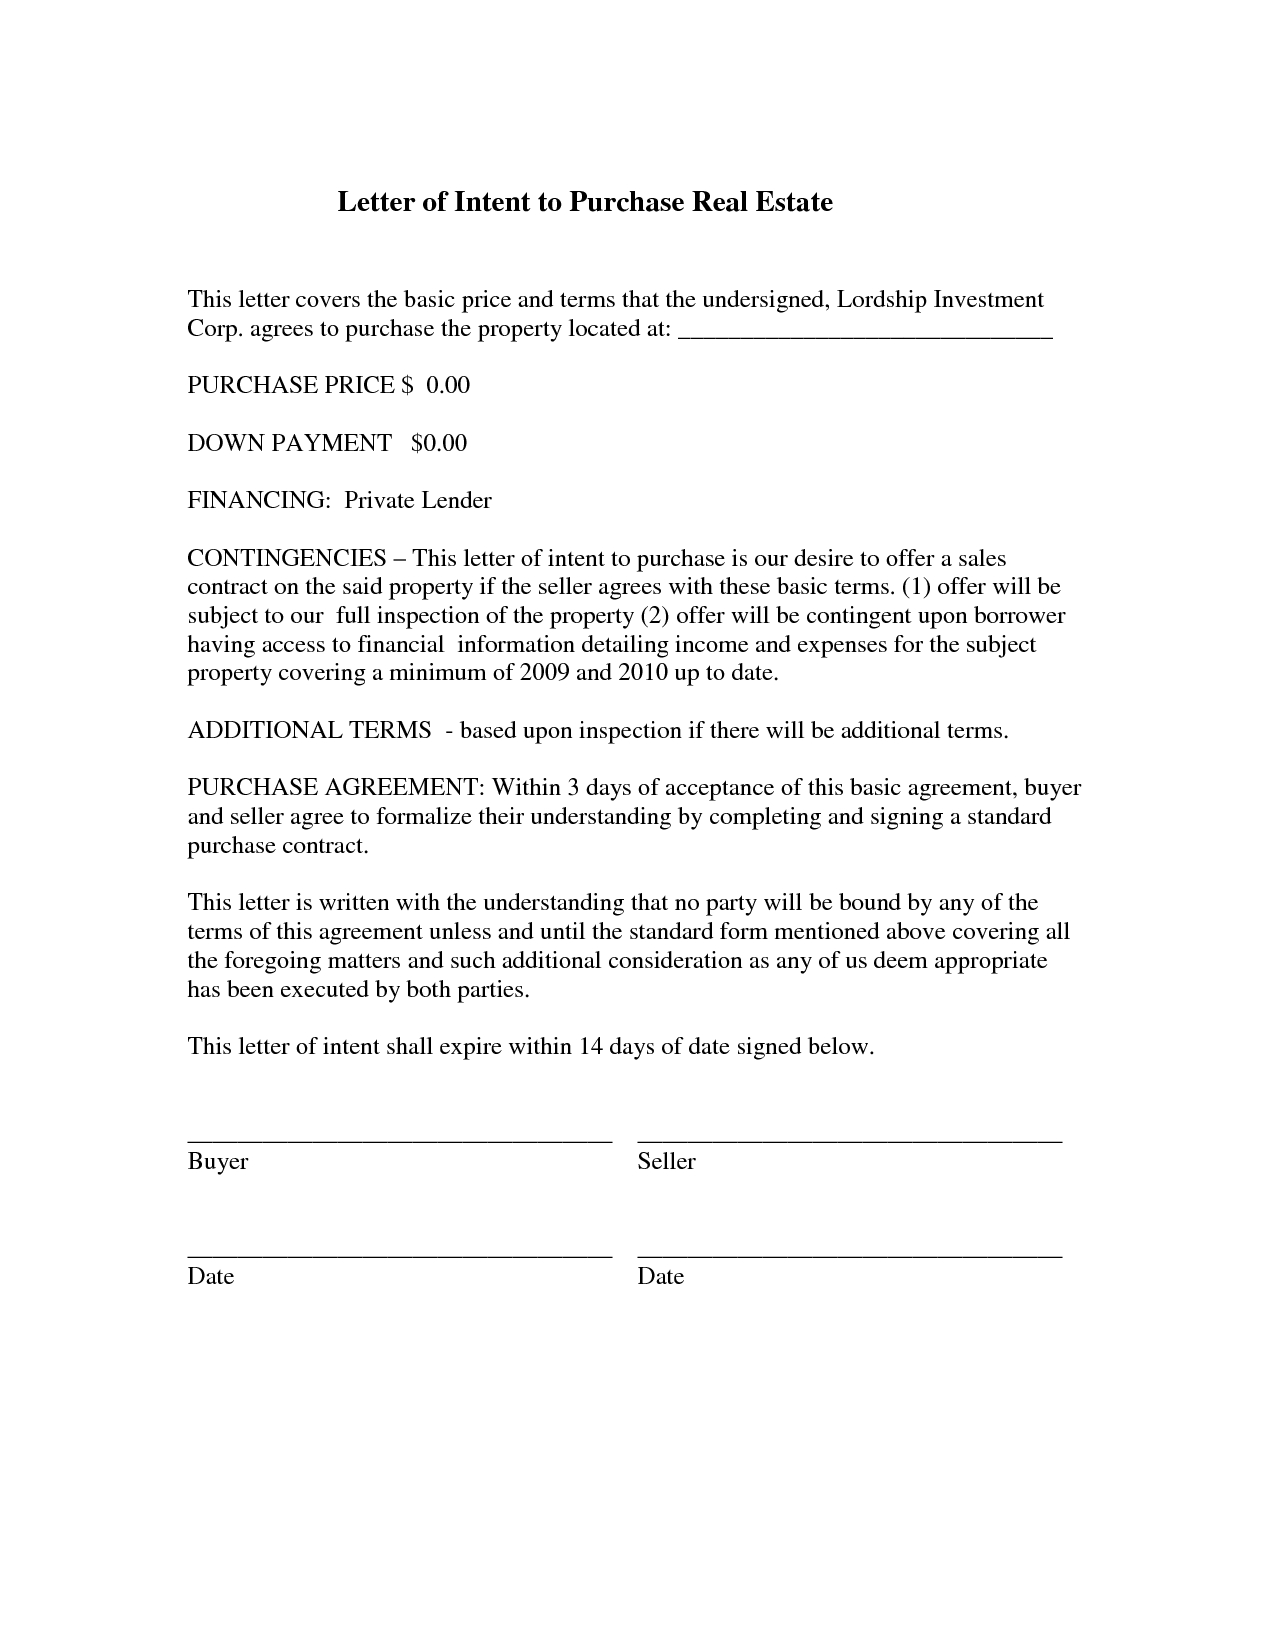 Real Estate Letter Of Intent Template Free - Best S Er Intent Property Template to Purchase Real Estate